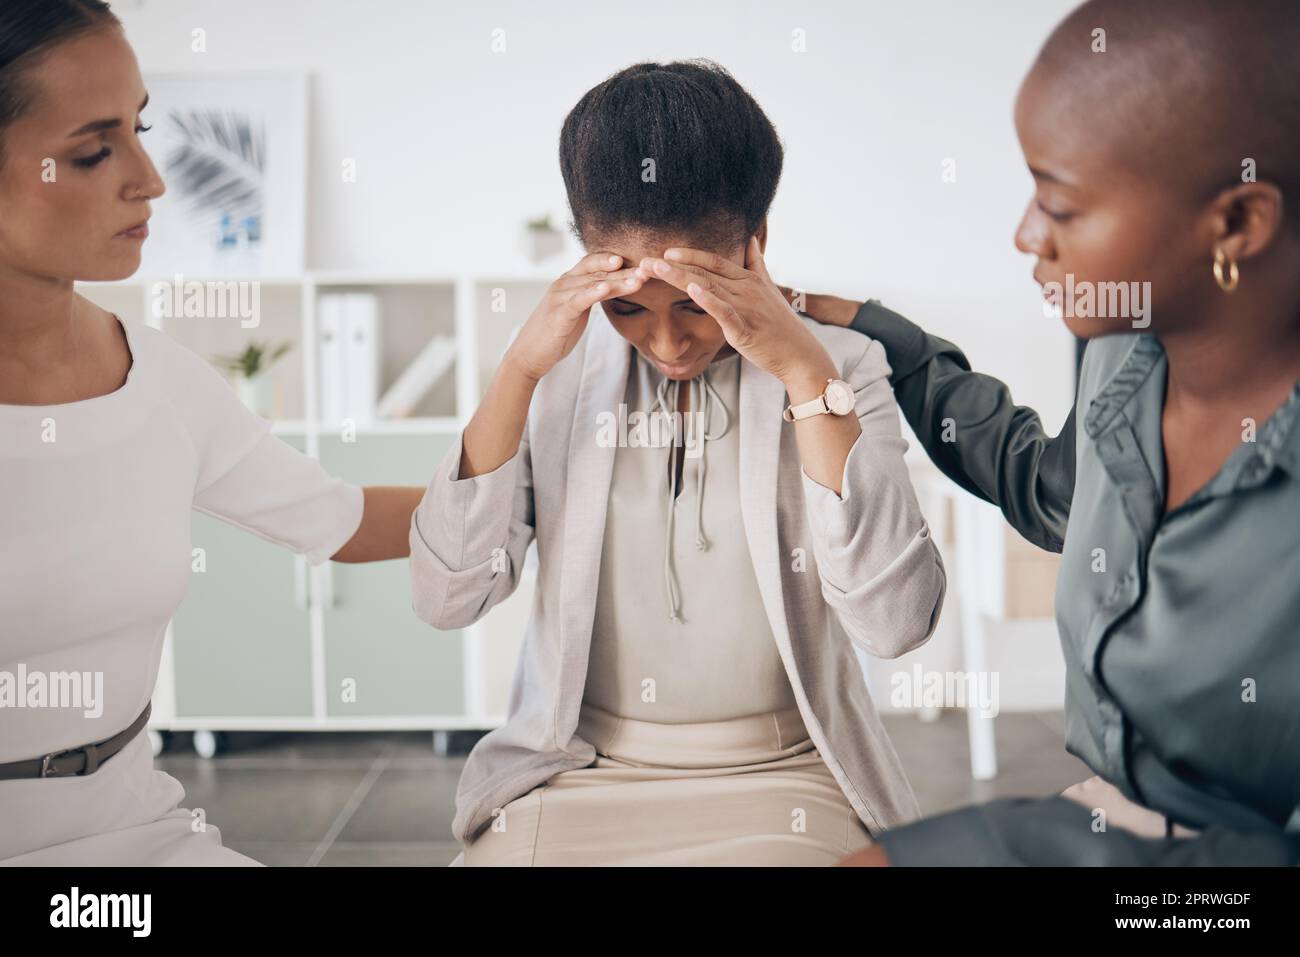 Mental health, depression and business support group with woman comfort friend after getting bad news at work. Unhappy, fired and sad employee in friends circle showing unity, kindness and community Stock Photo